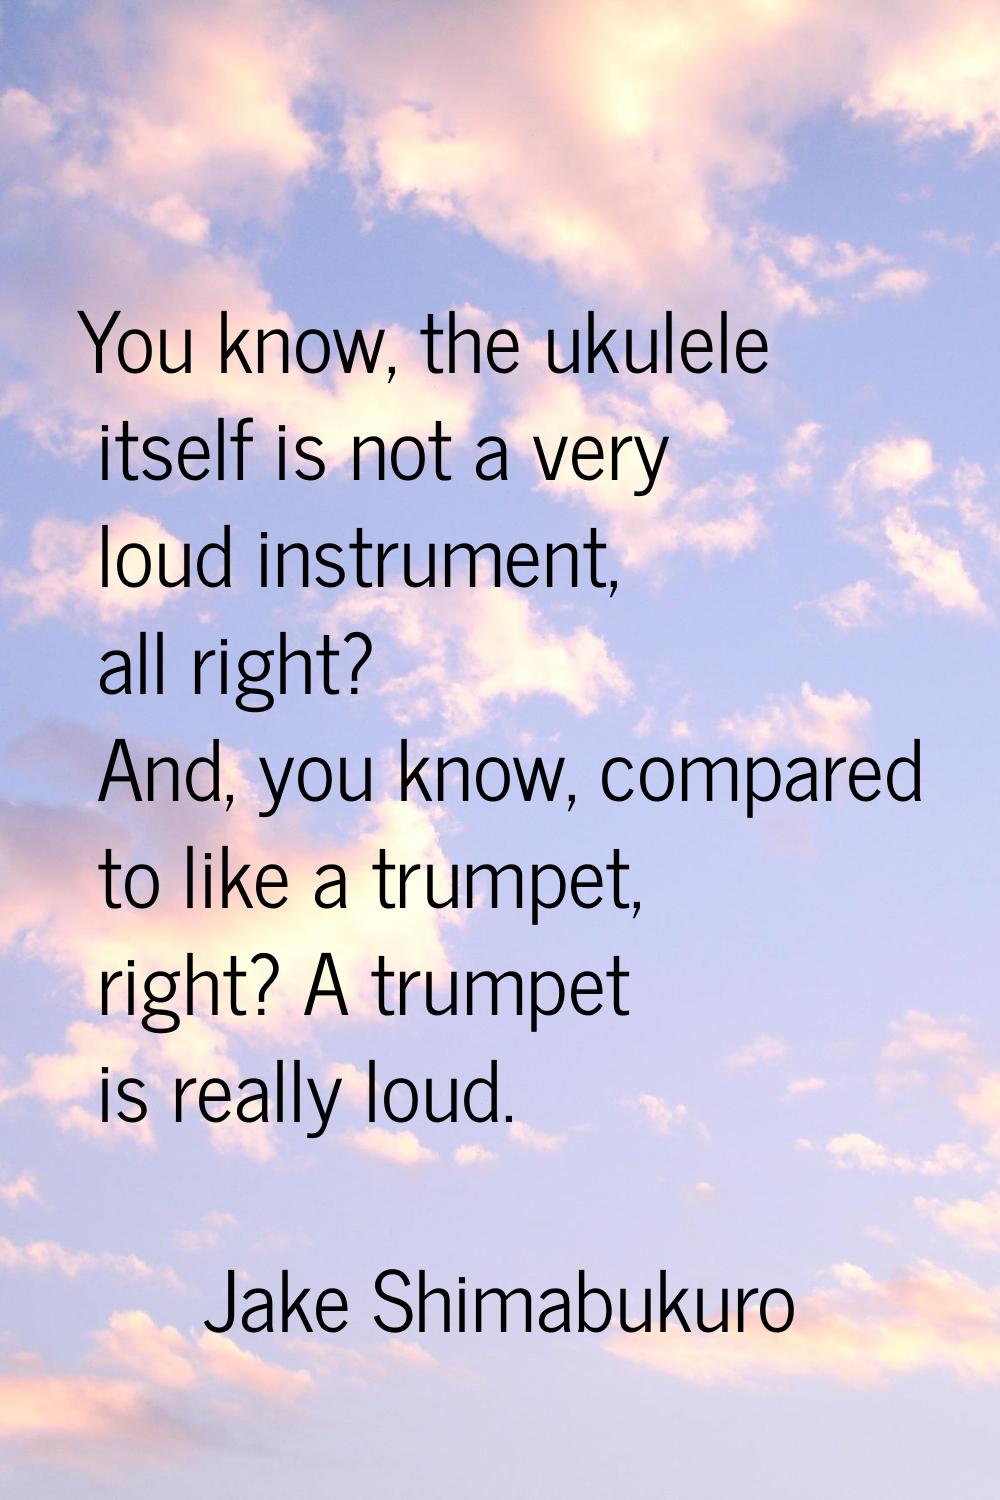 You know, the ukulele itself is not a very loud instrument, all right? And, you know, compared to l